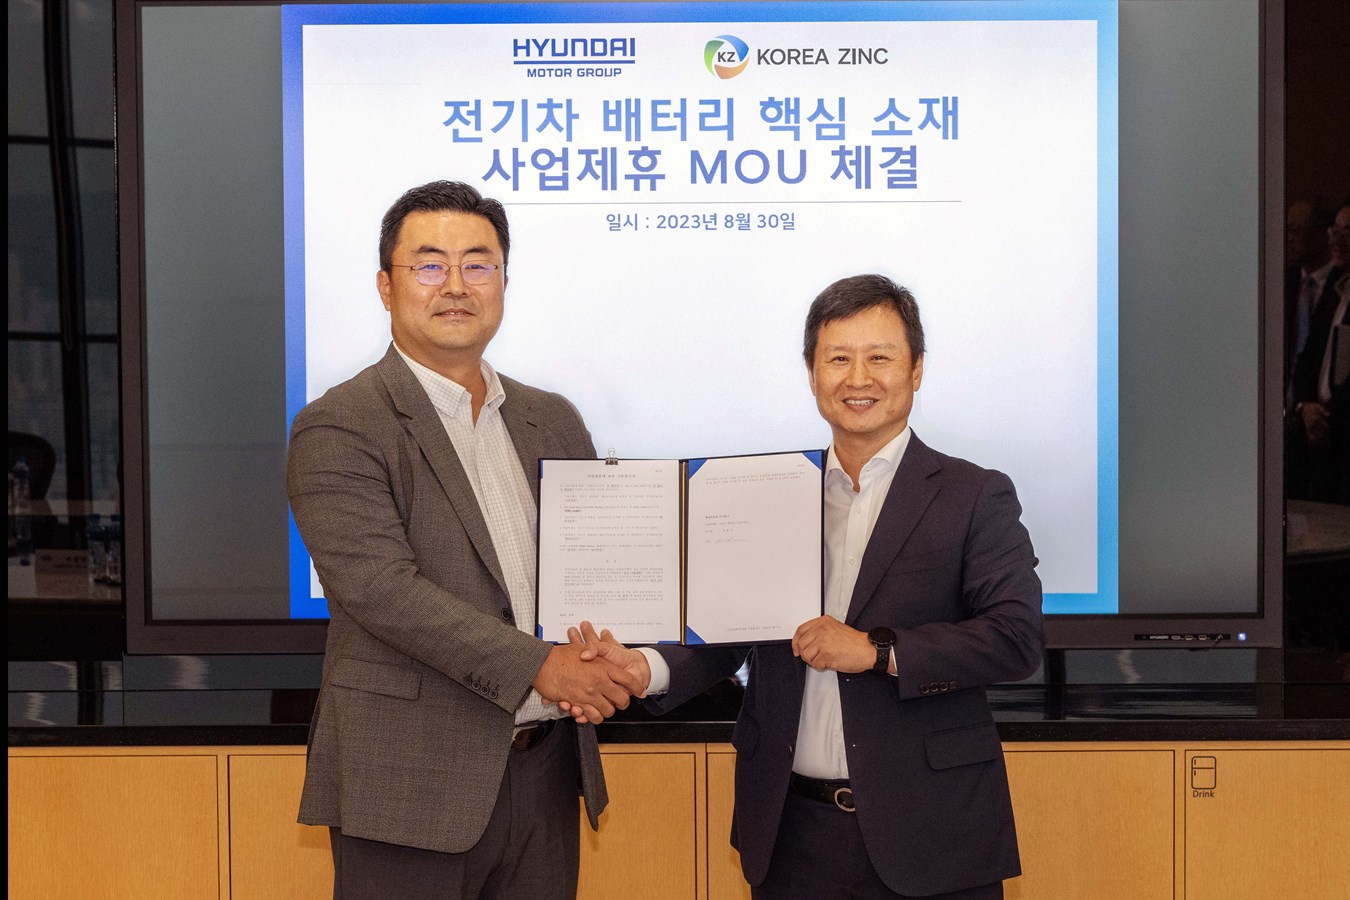 Hyundai Motor Group Partners with Korea Zinc  on Value Chain for EV Business